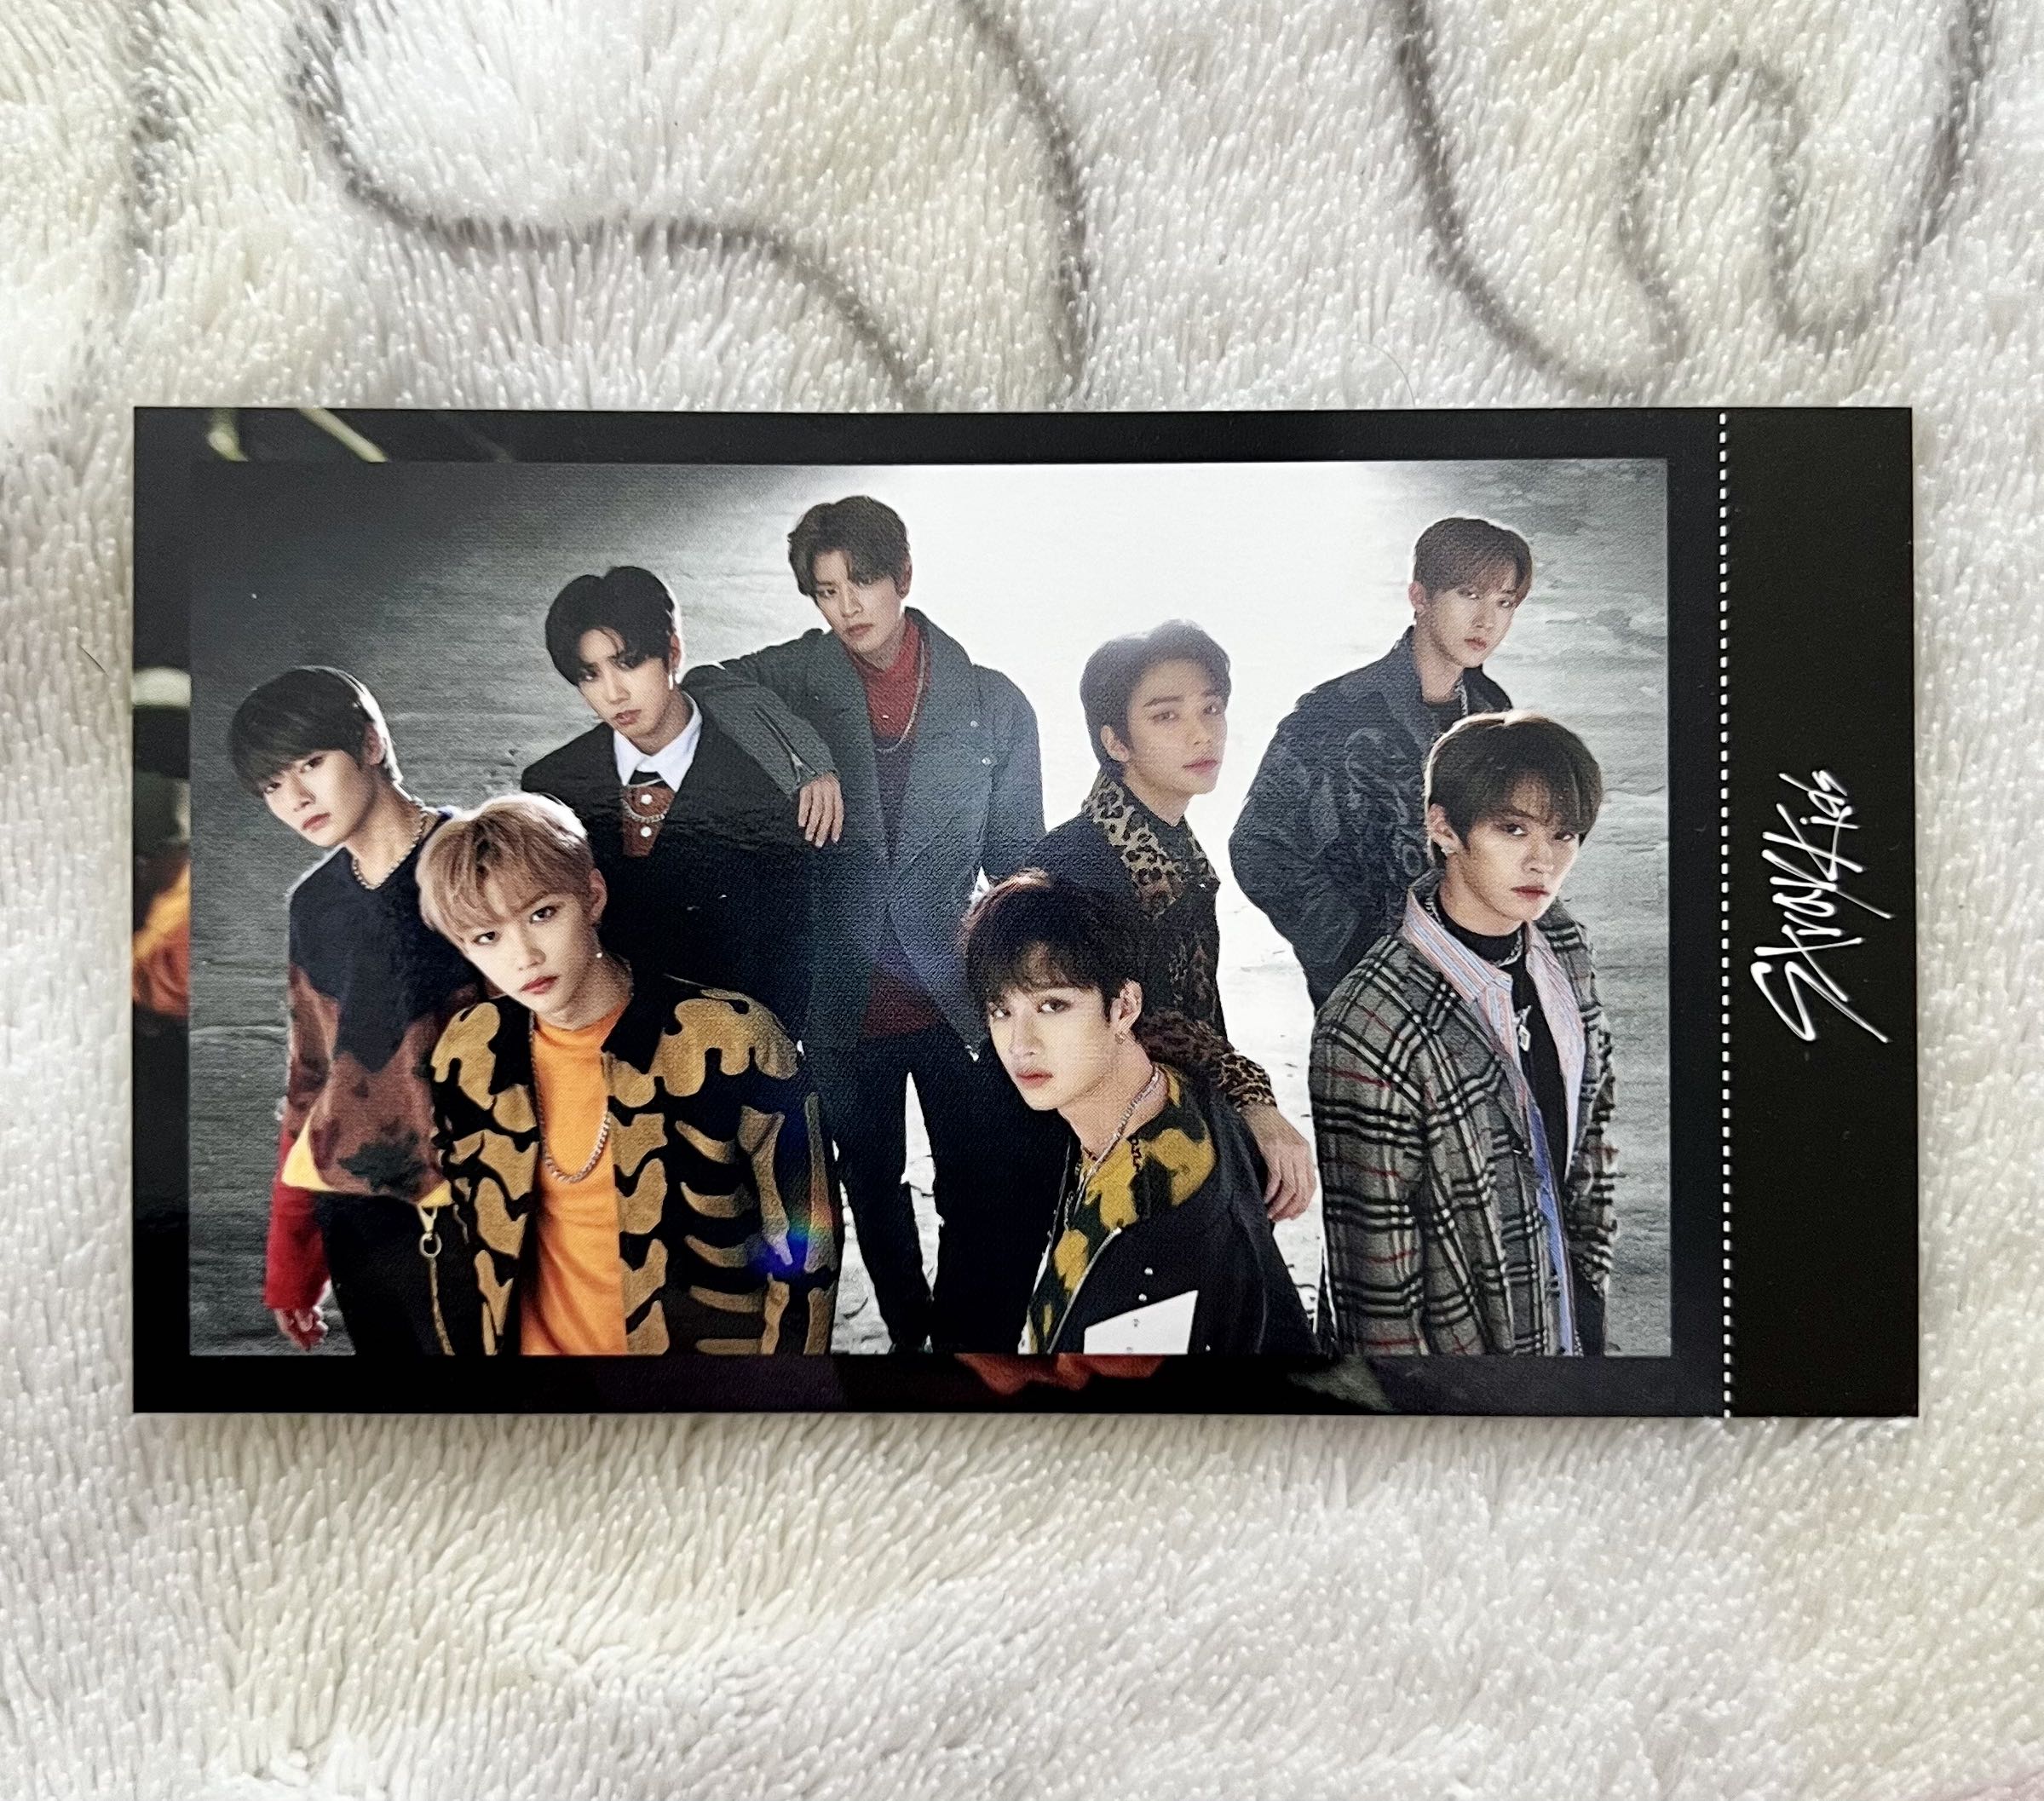 [WTS/LFB] Stray kids Skz2020 group photocard from Japanese album ...